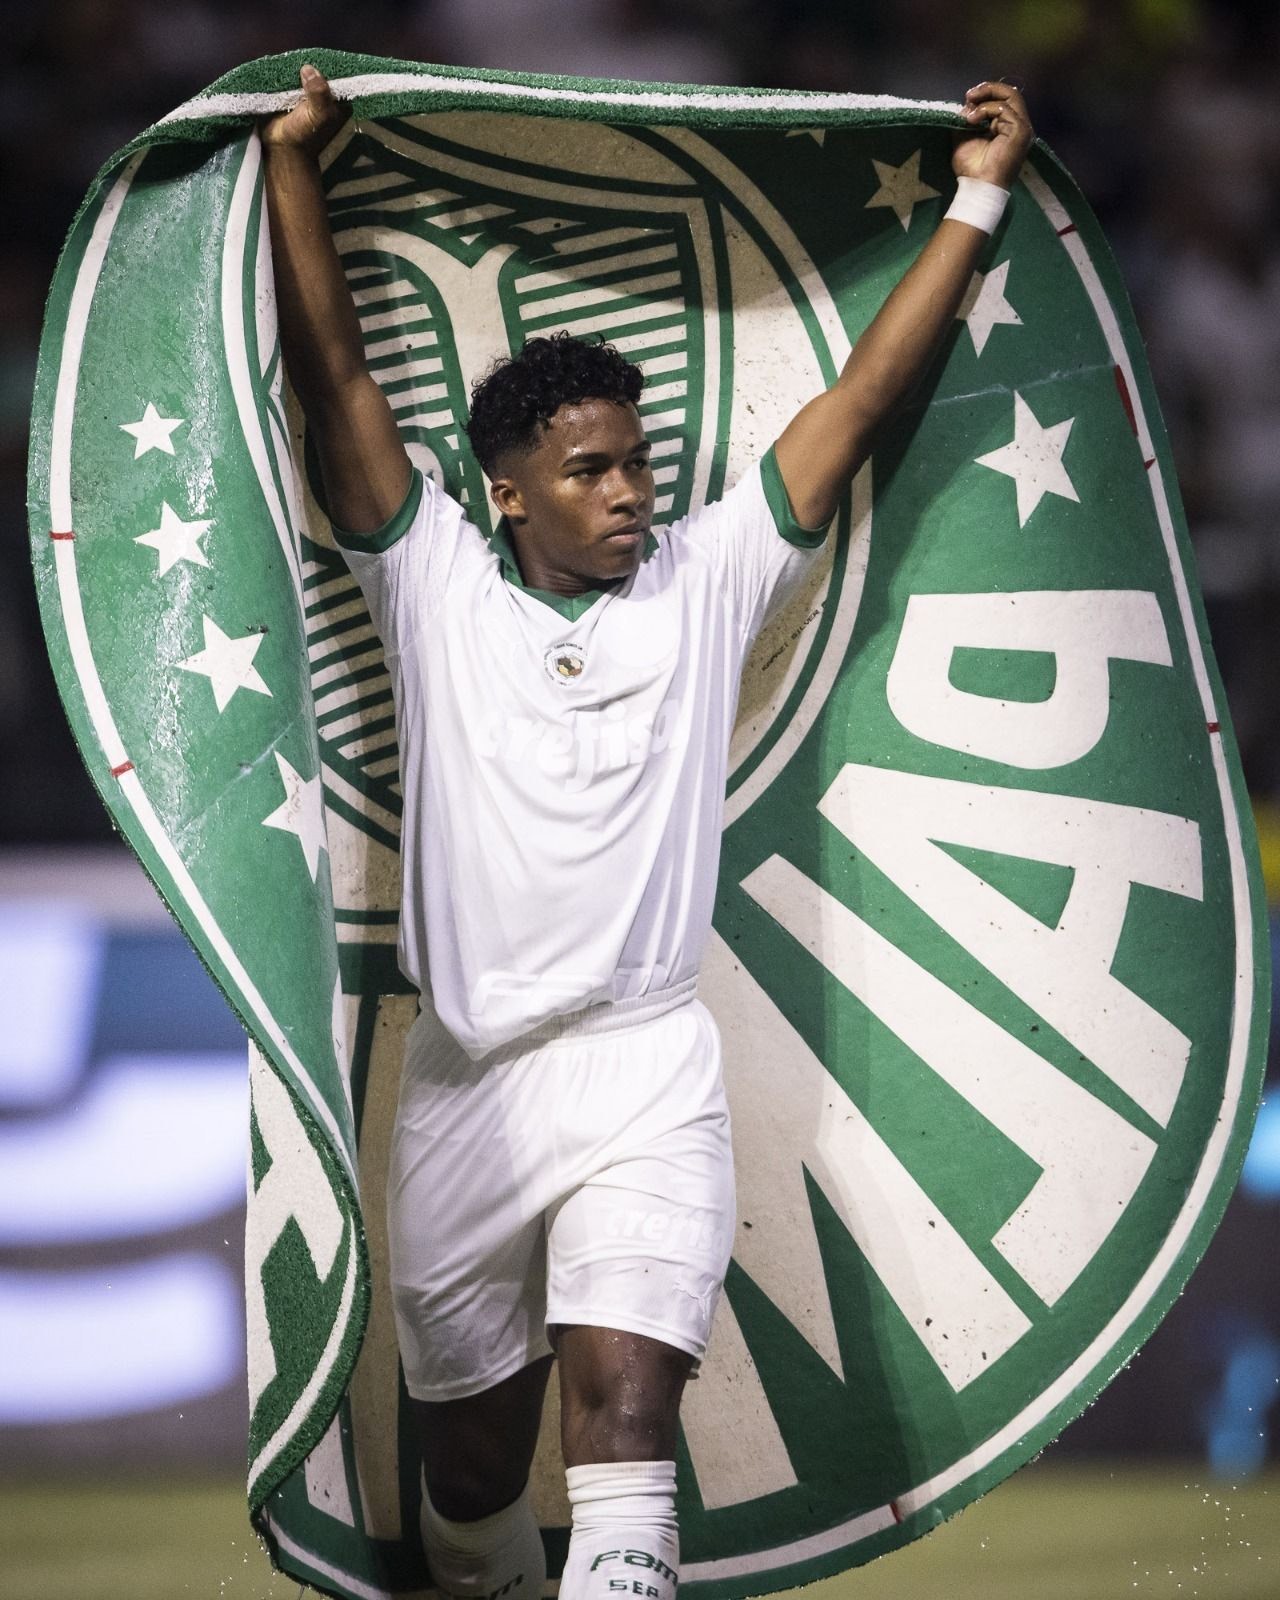 Indrek celebrates the goal of parapalmeiras and lifts the carpet with the club logo